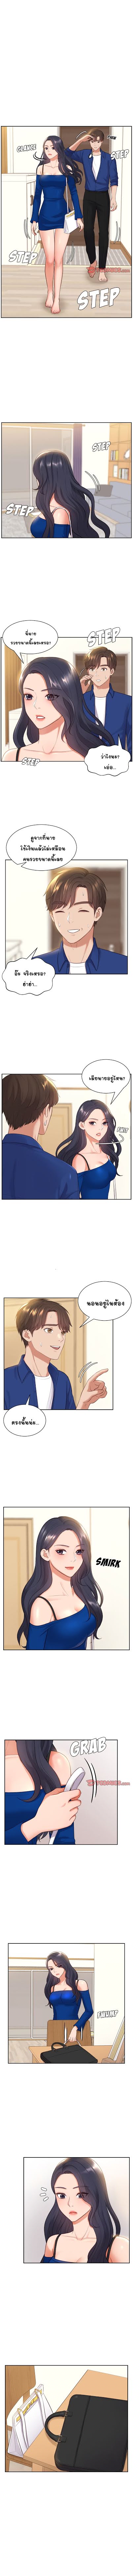 Her Situation - หน้า 1